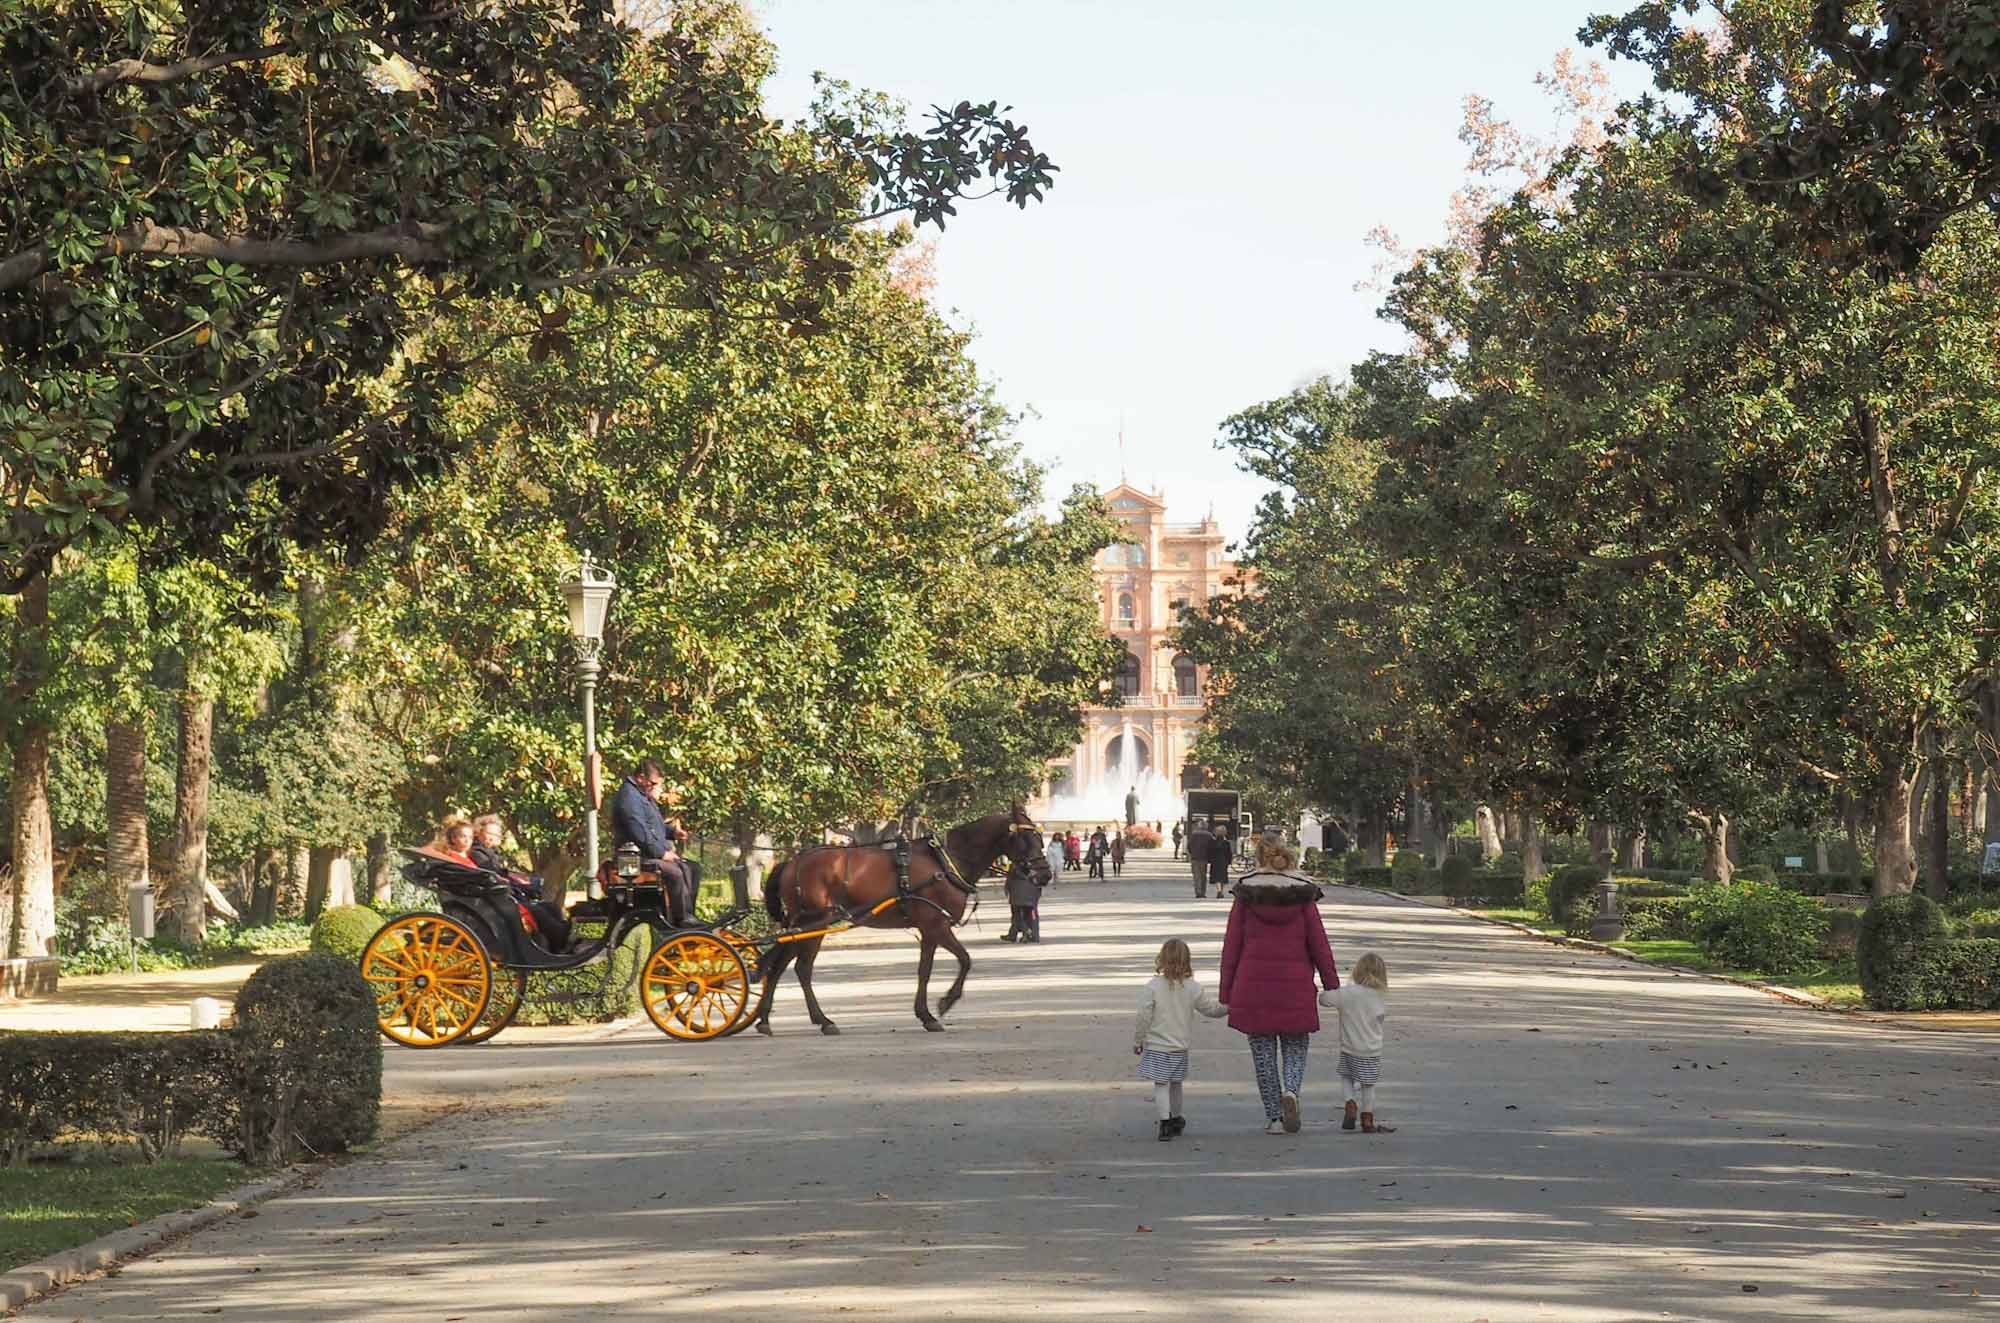 Wide promenade through a city park, with a horse-drawn carriage